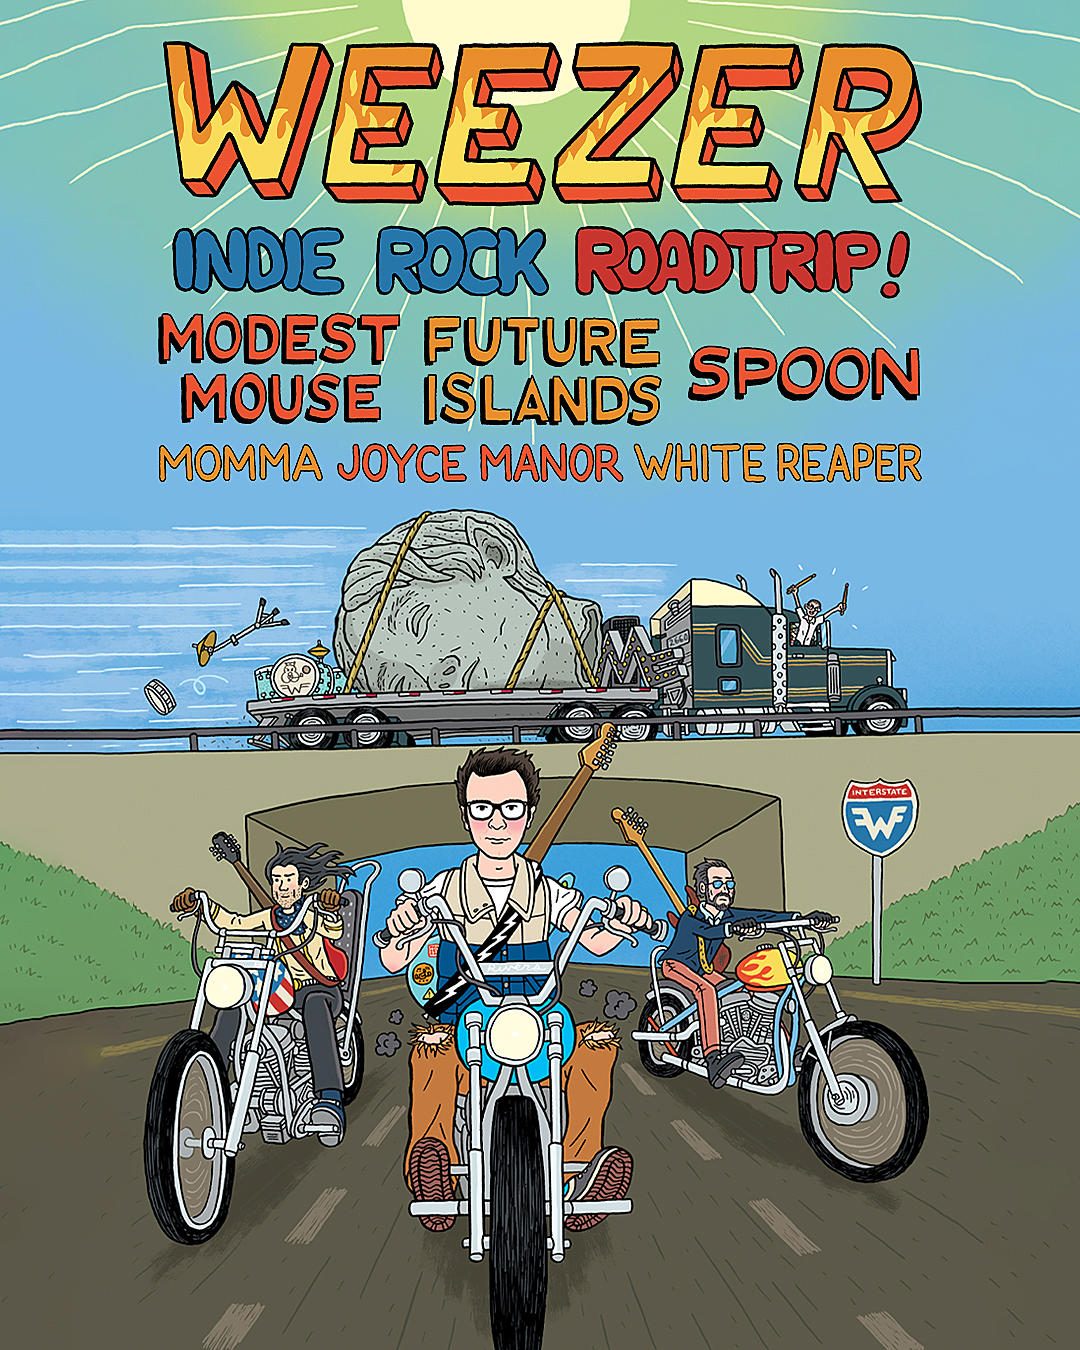 Weezer Music - Surprise 16 Roxy mxdwn the March at on Show